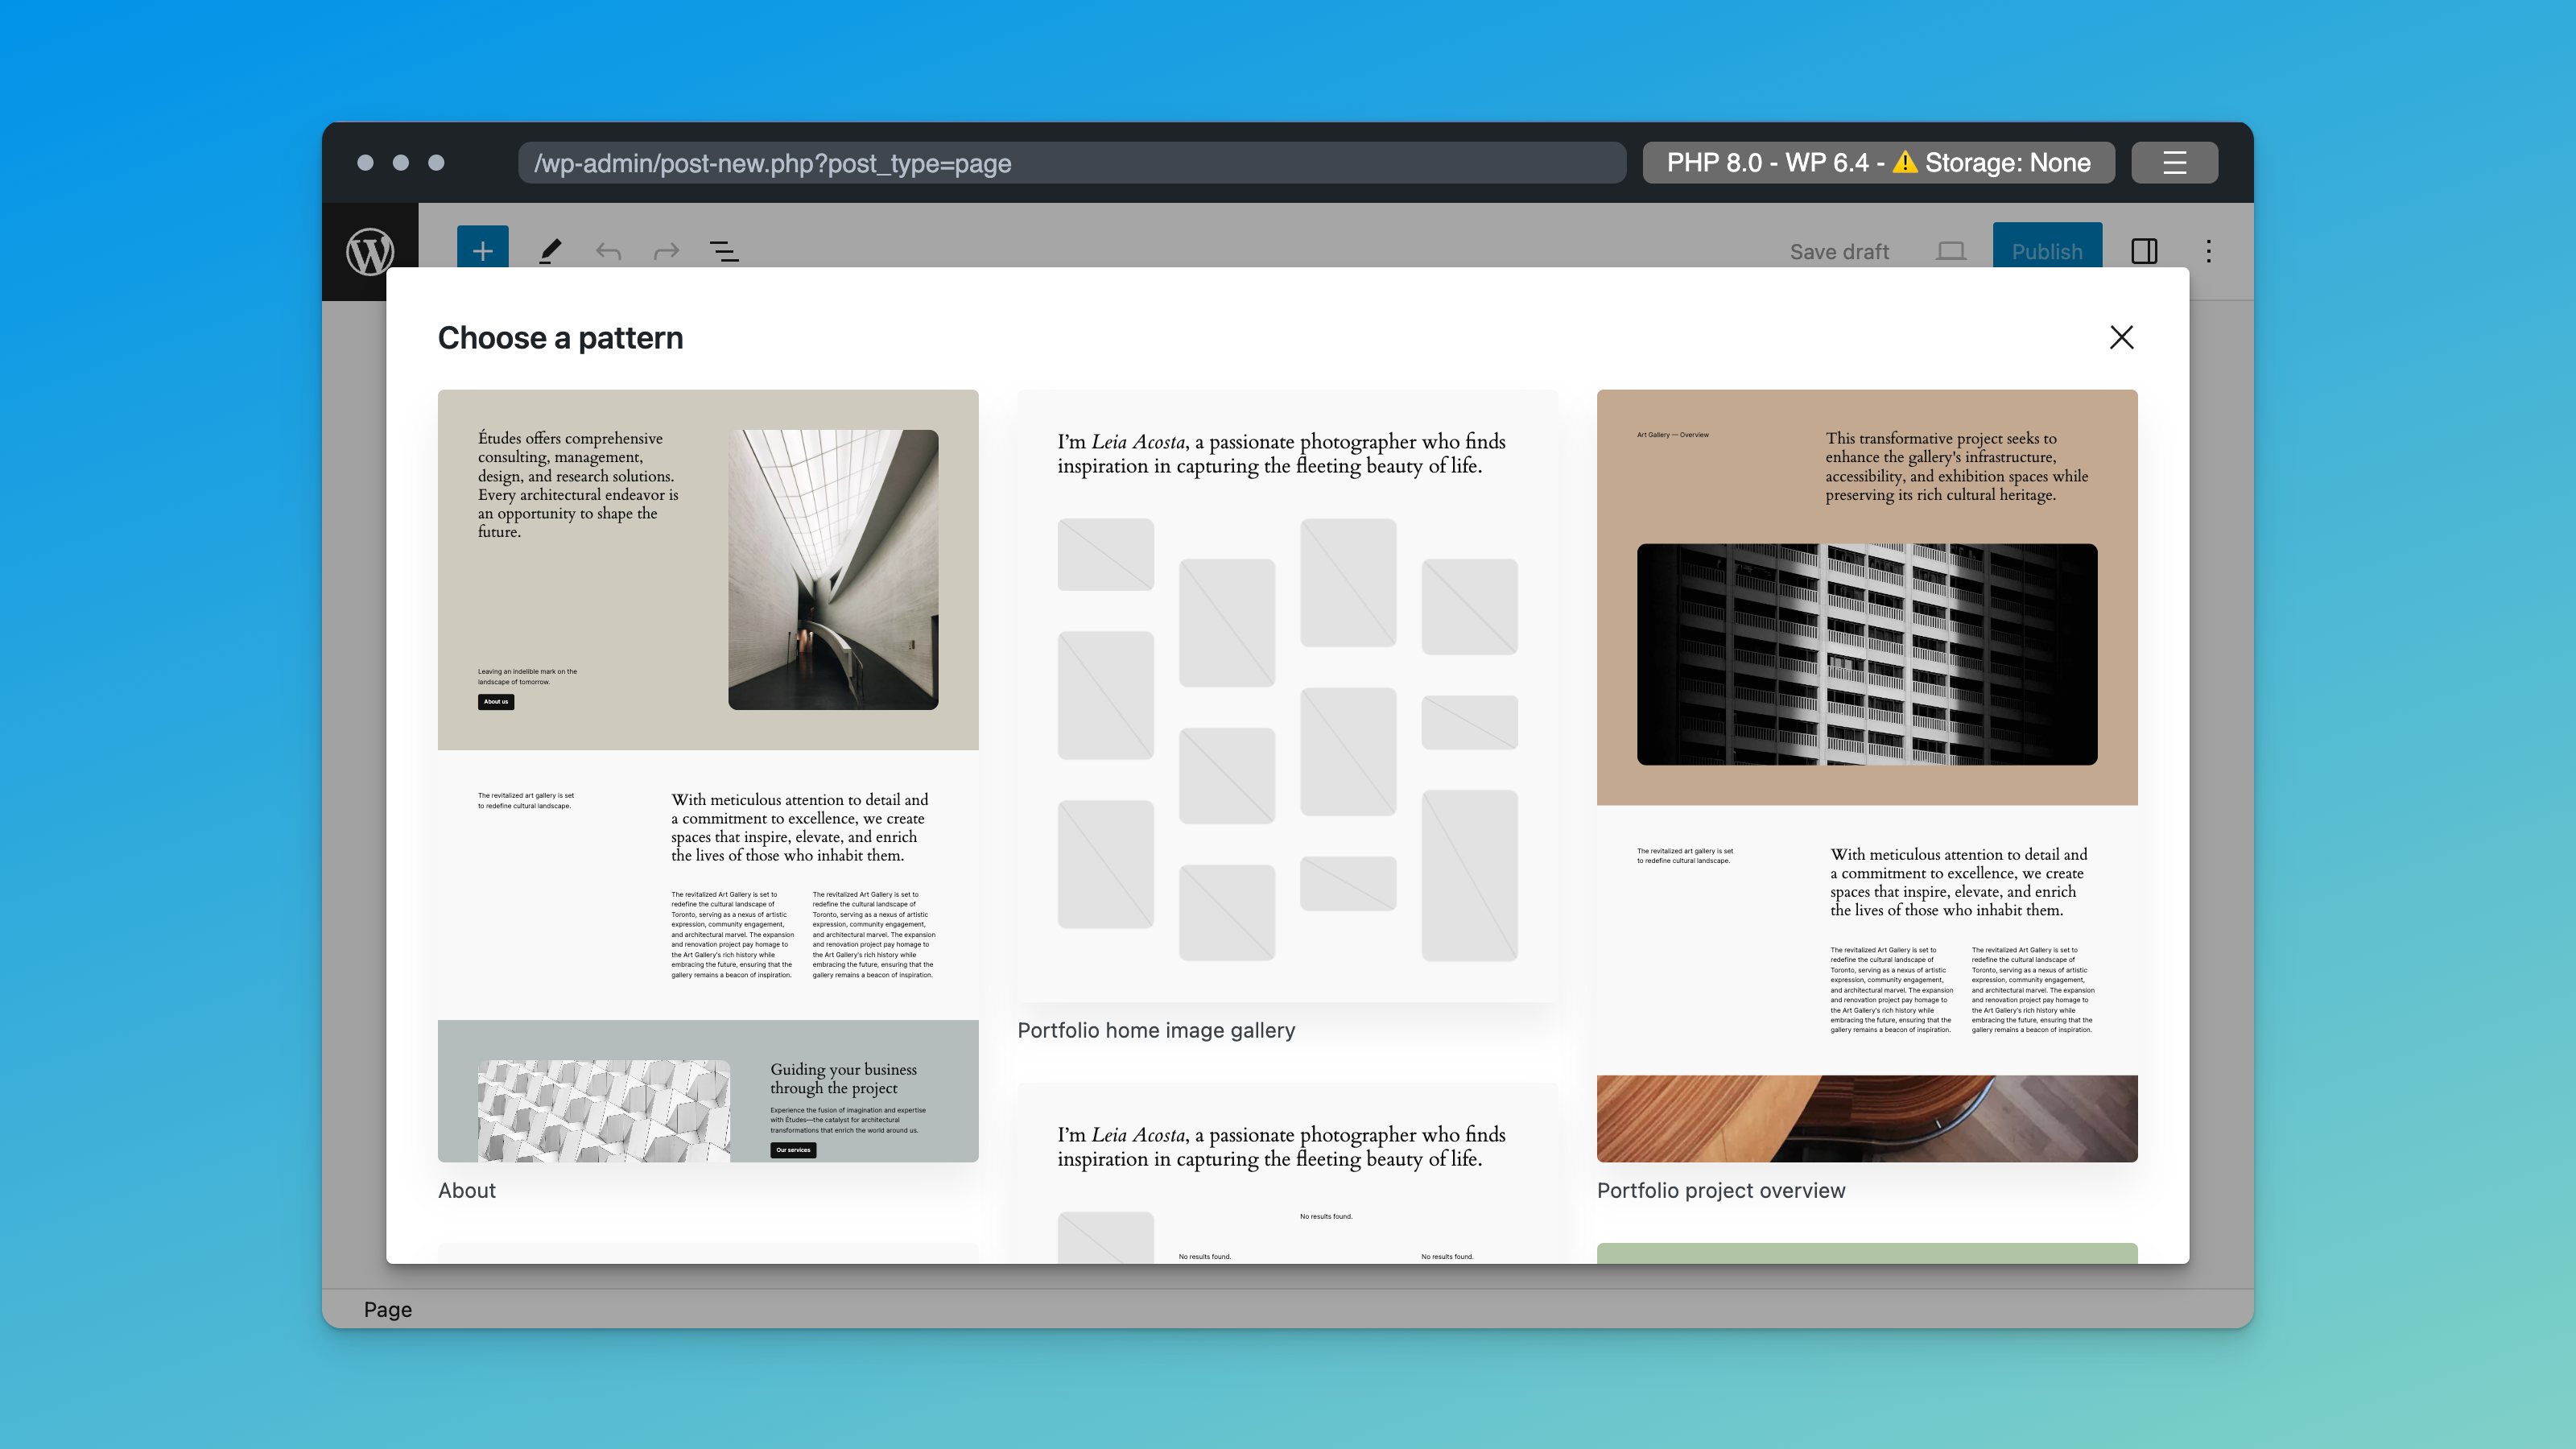 A screenshot of the new page screen in WordPress with the Choose a pattern modal activated.